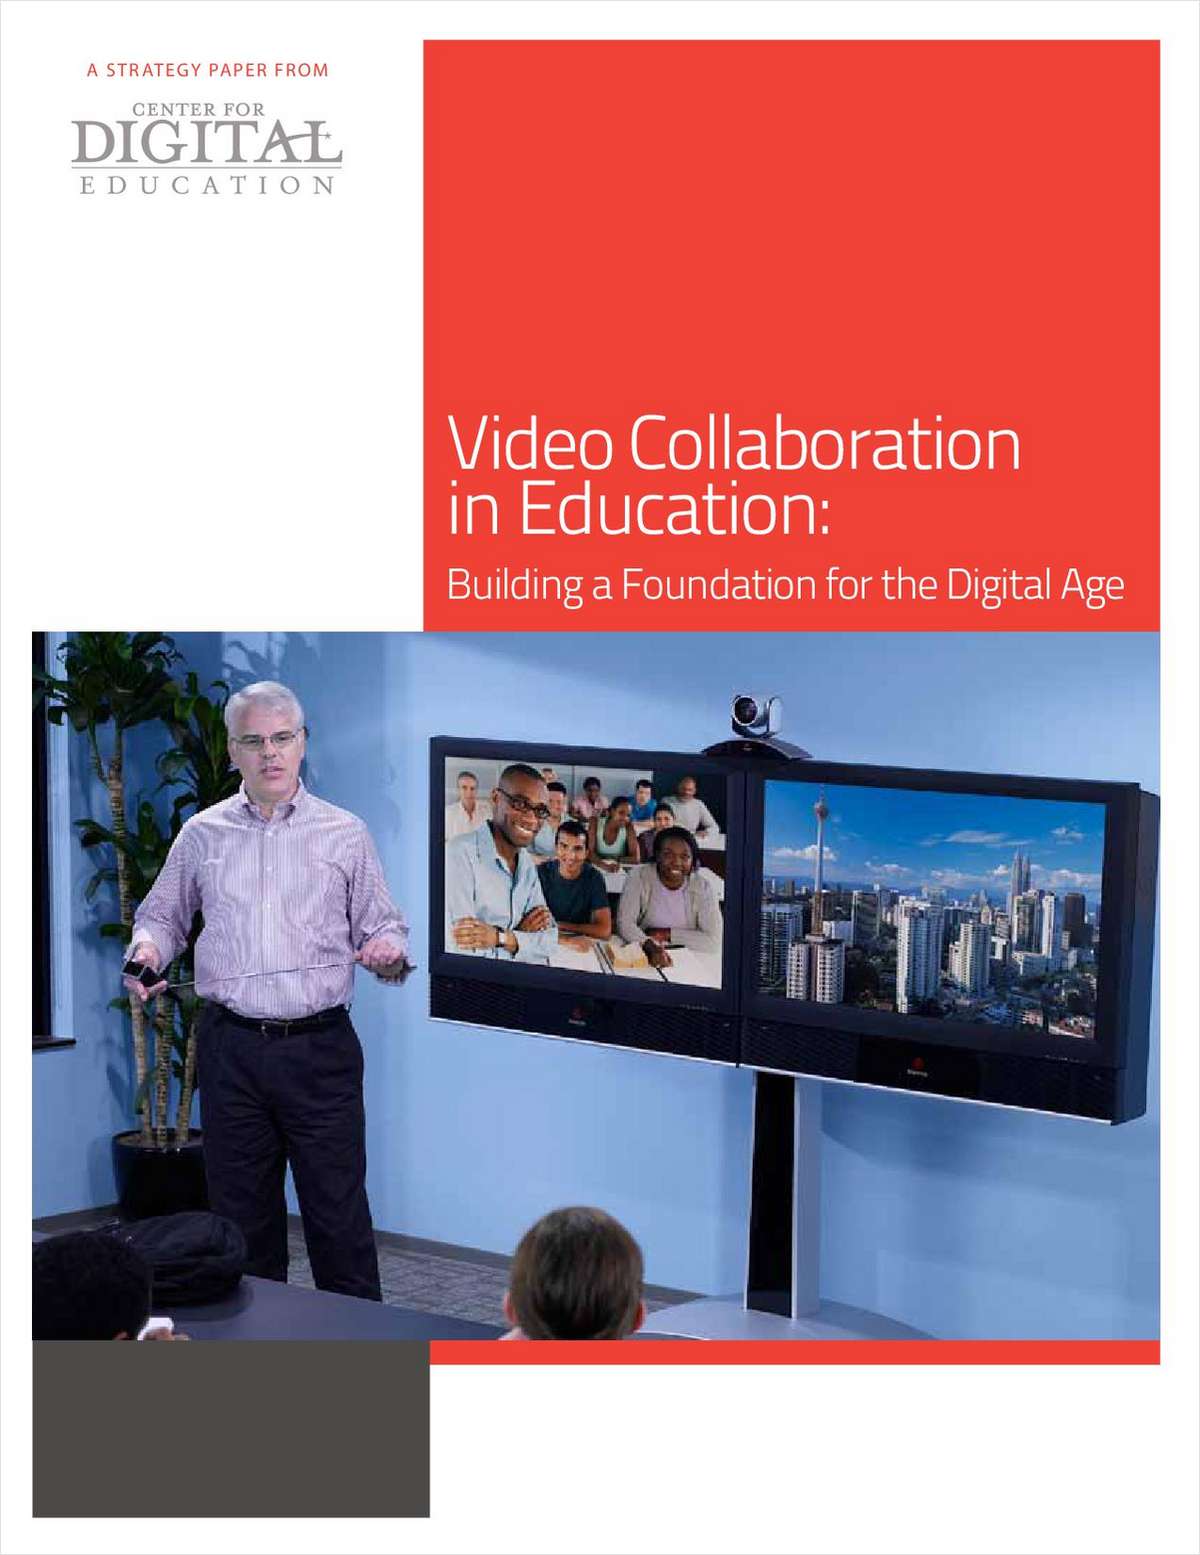 Video Collaboration in Education: Building a Foundation for the Digital Age